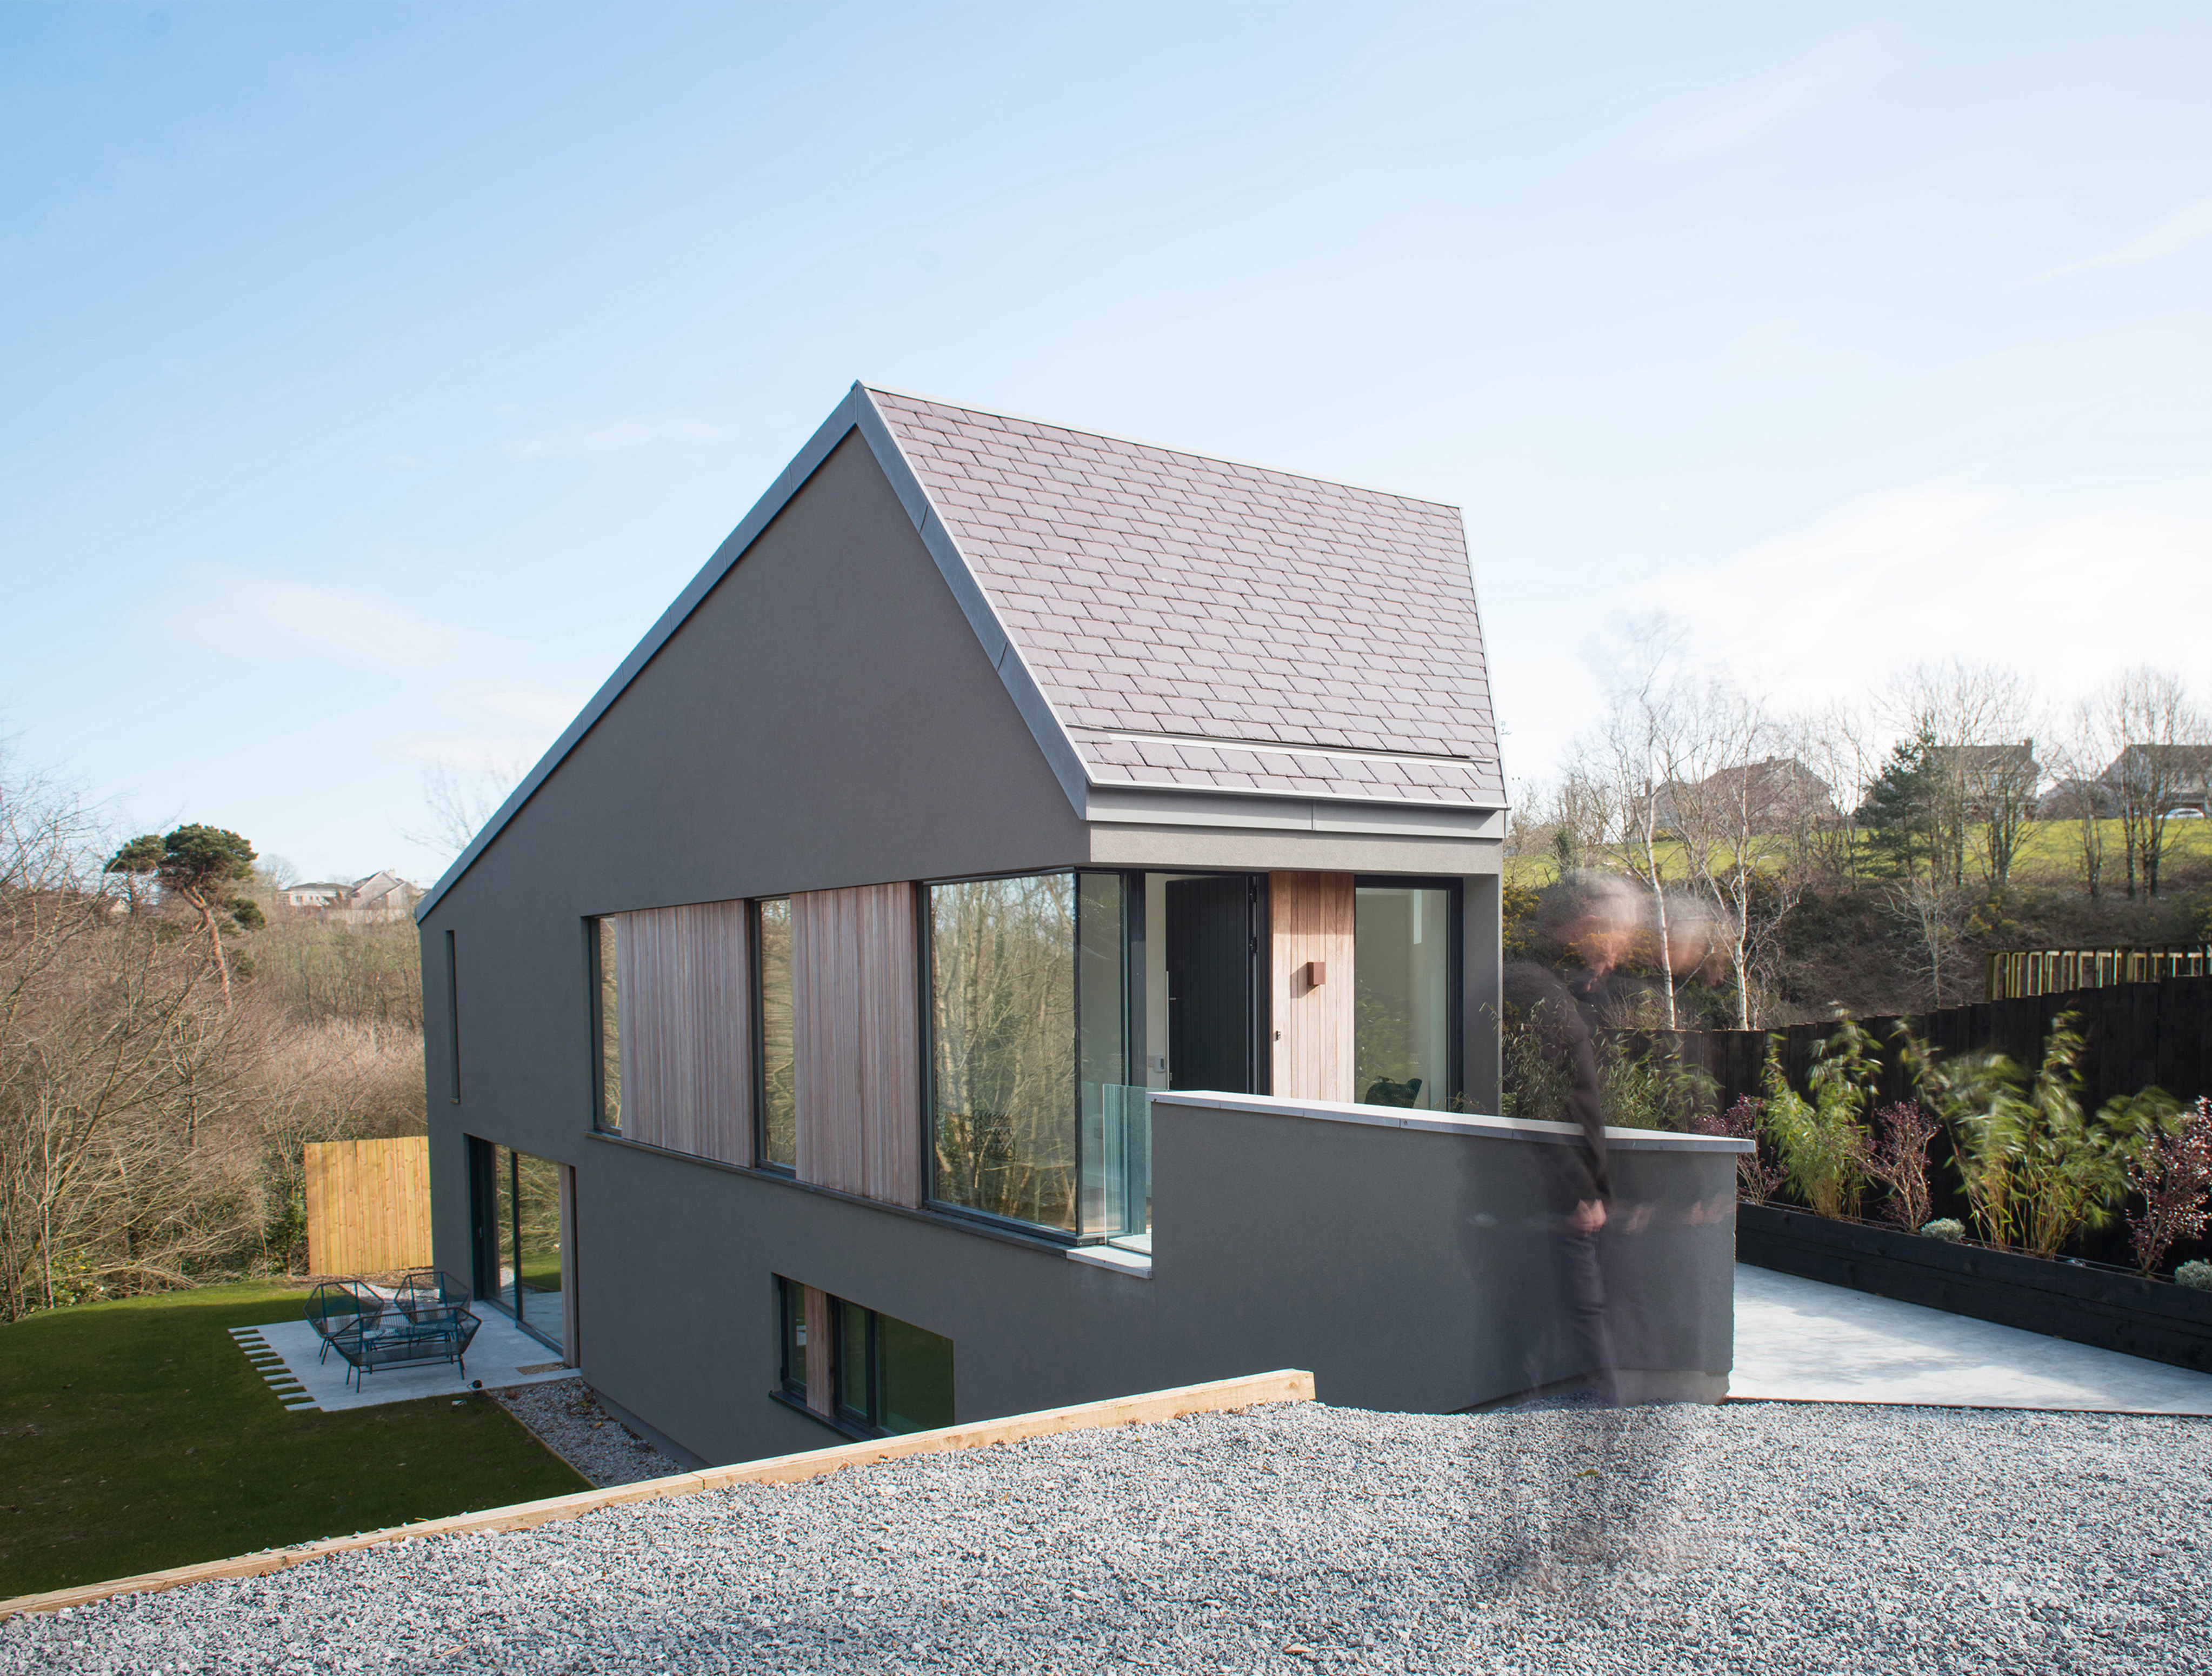 Welsh Slate helps with a steep learning curve @WelshSlateLtd